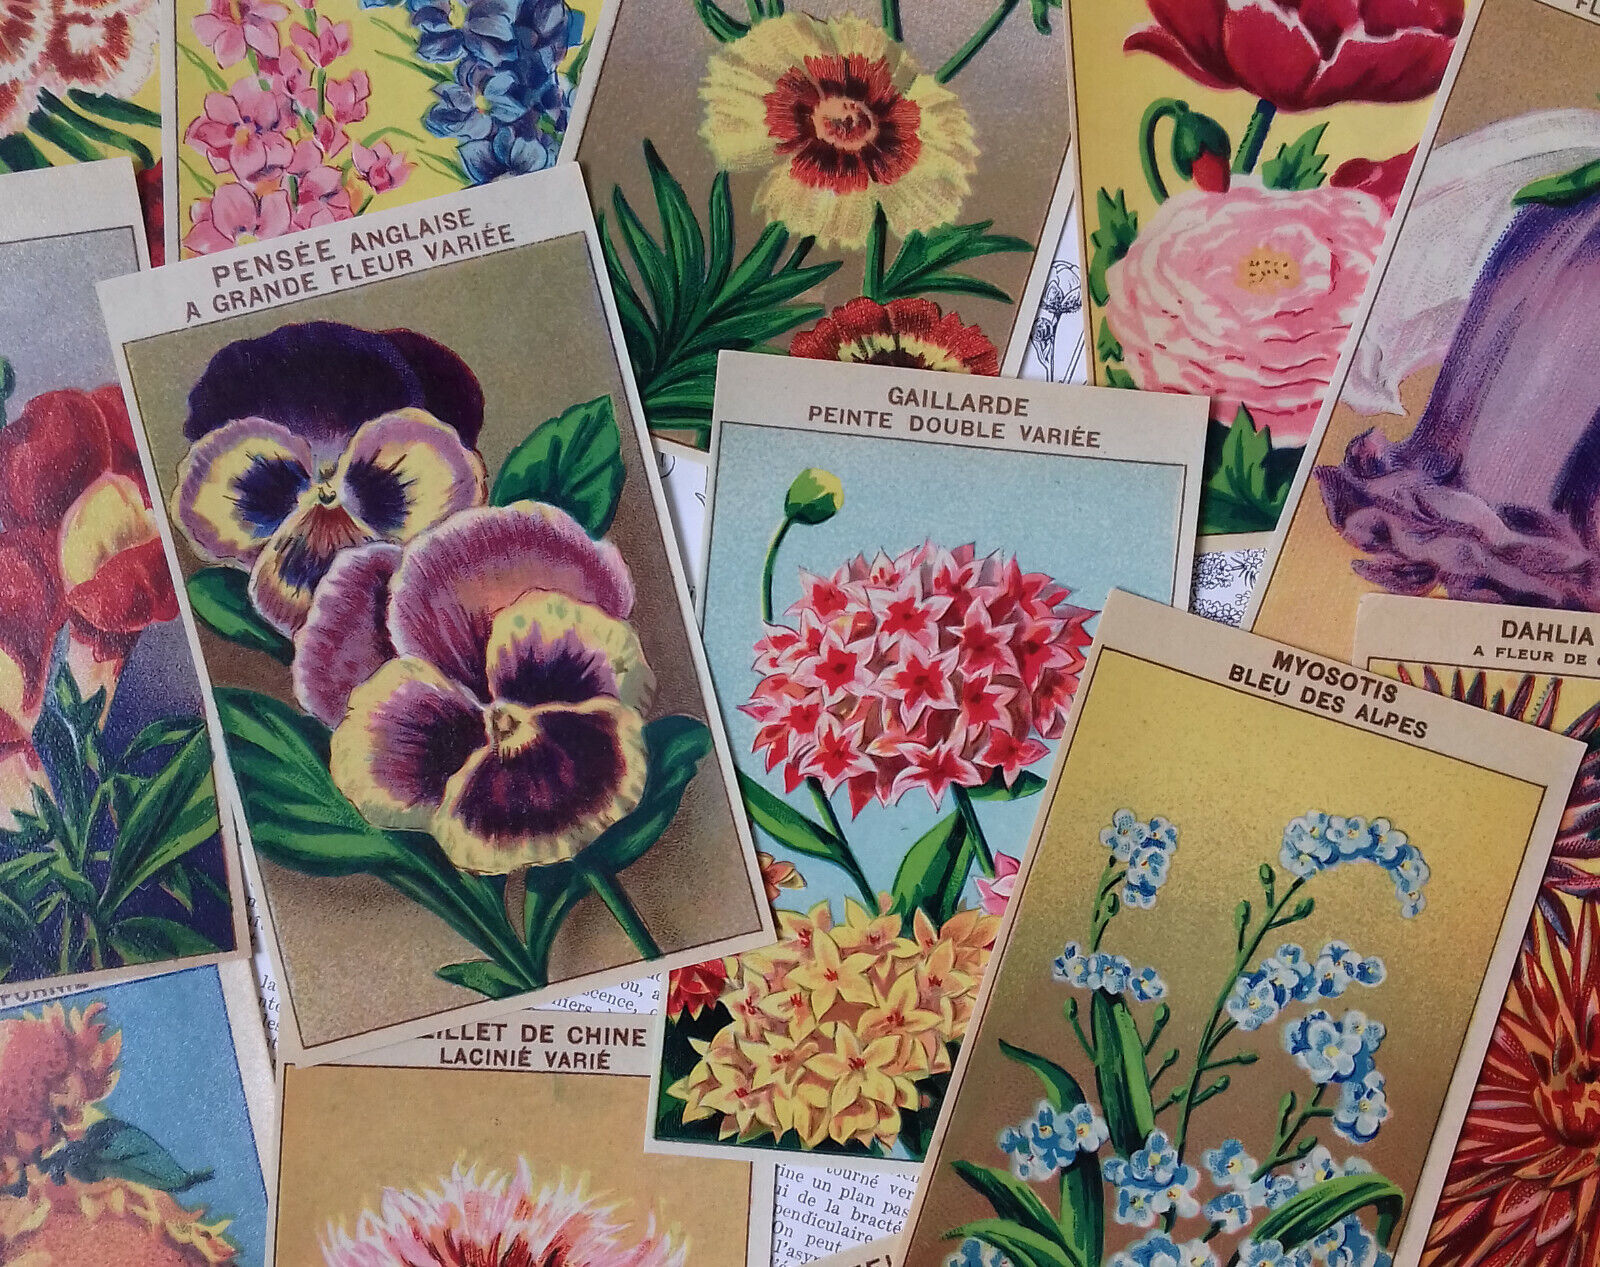 72 DIFFERENT Vintage French Flower Seed Packet Labels Genuine 1920's lithographs